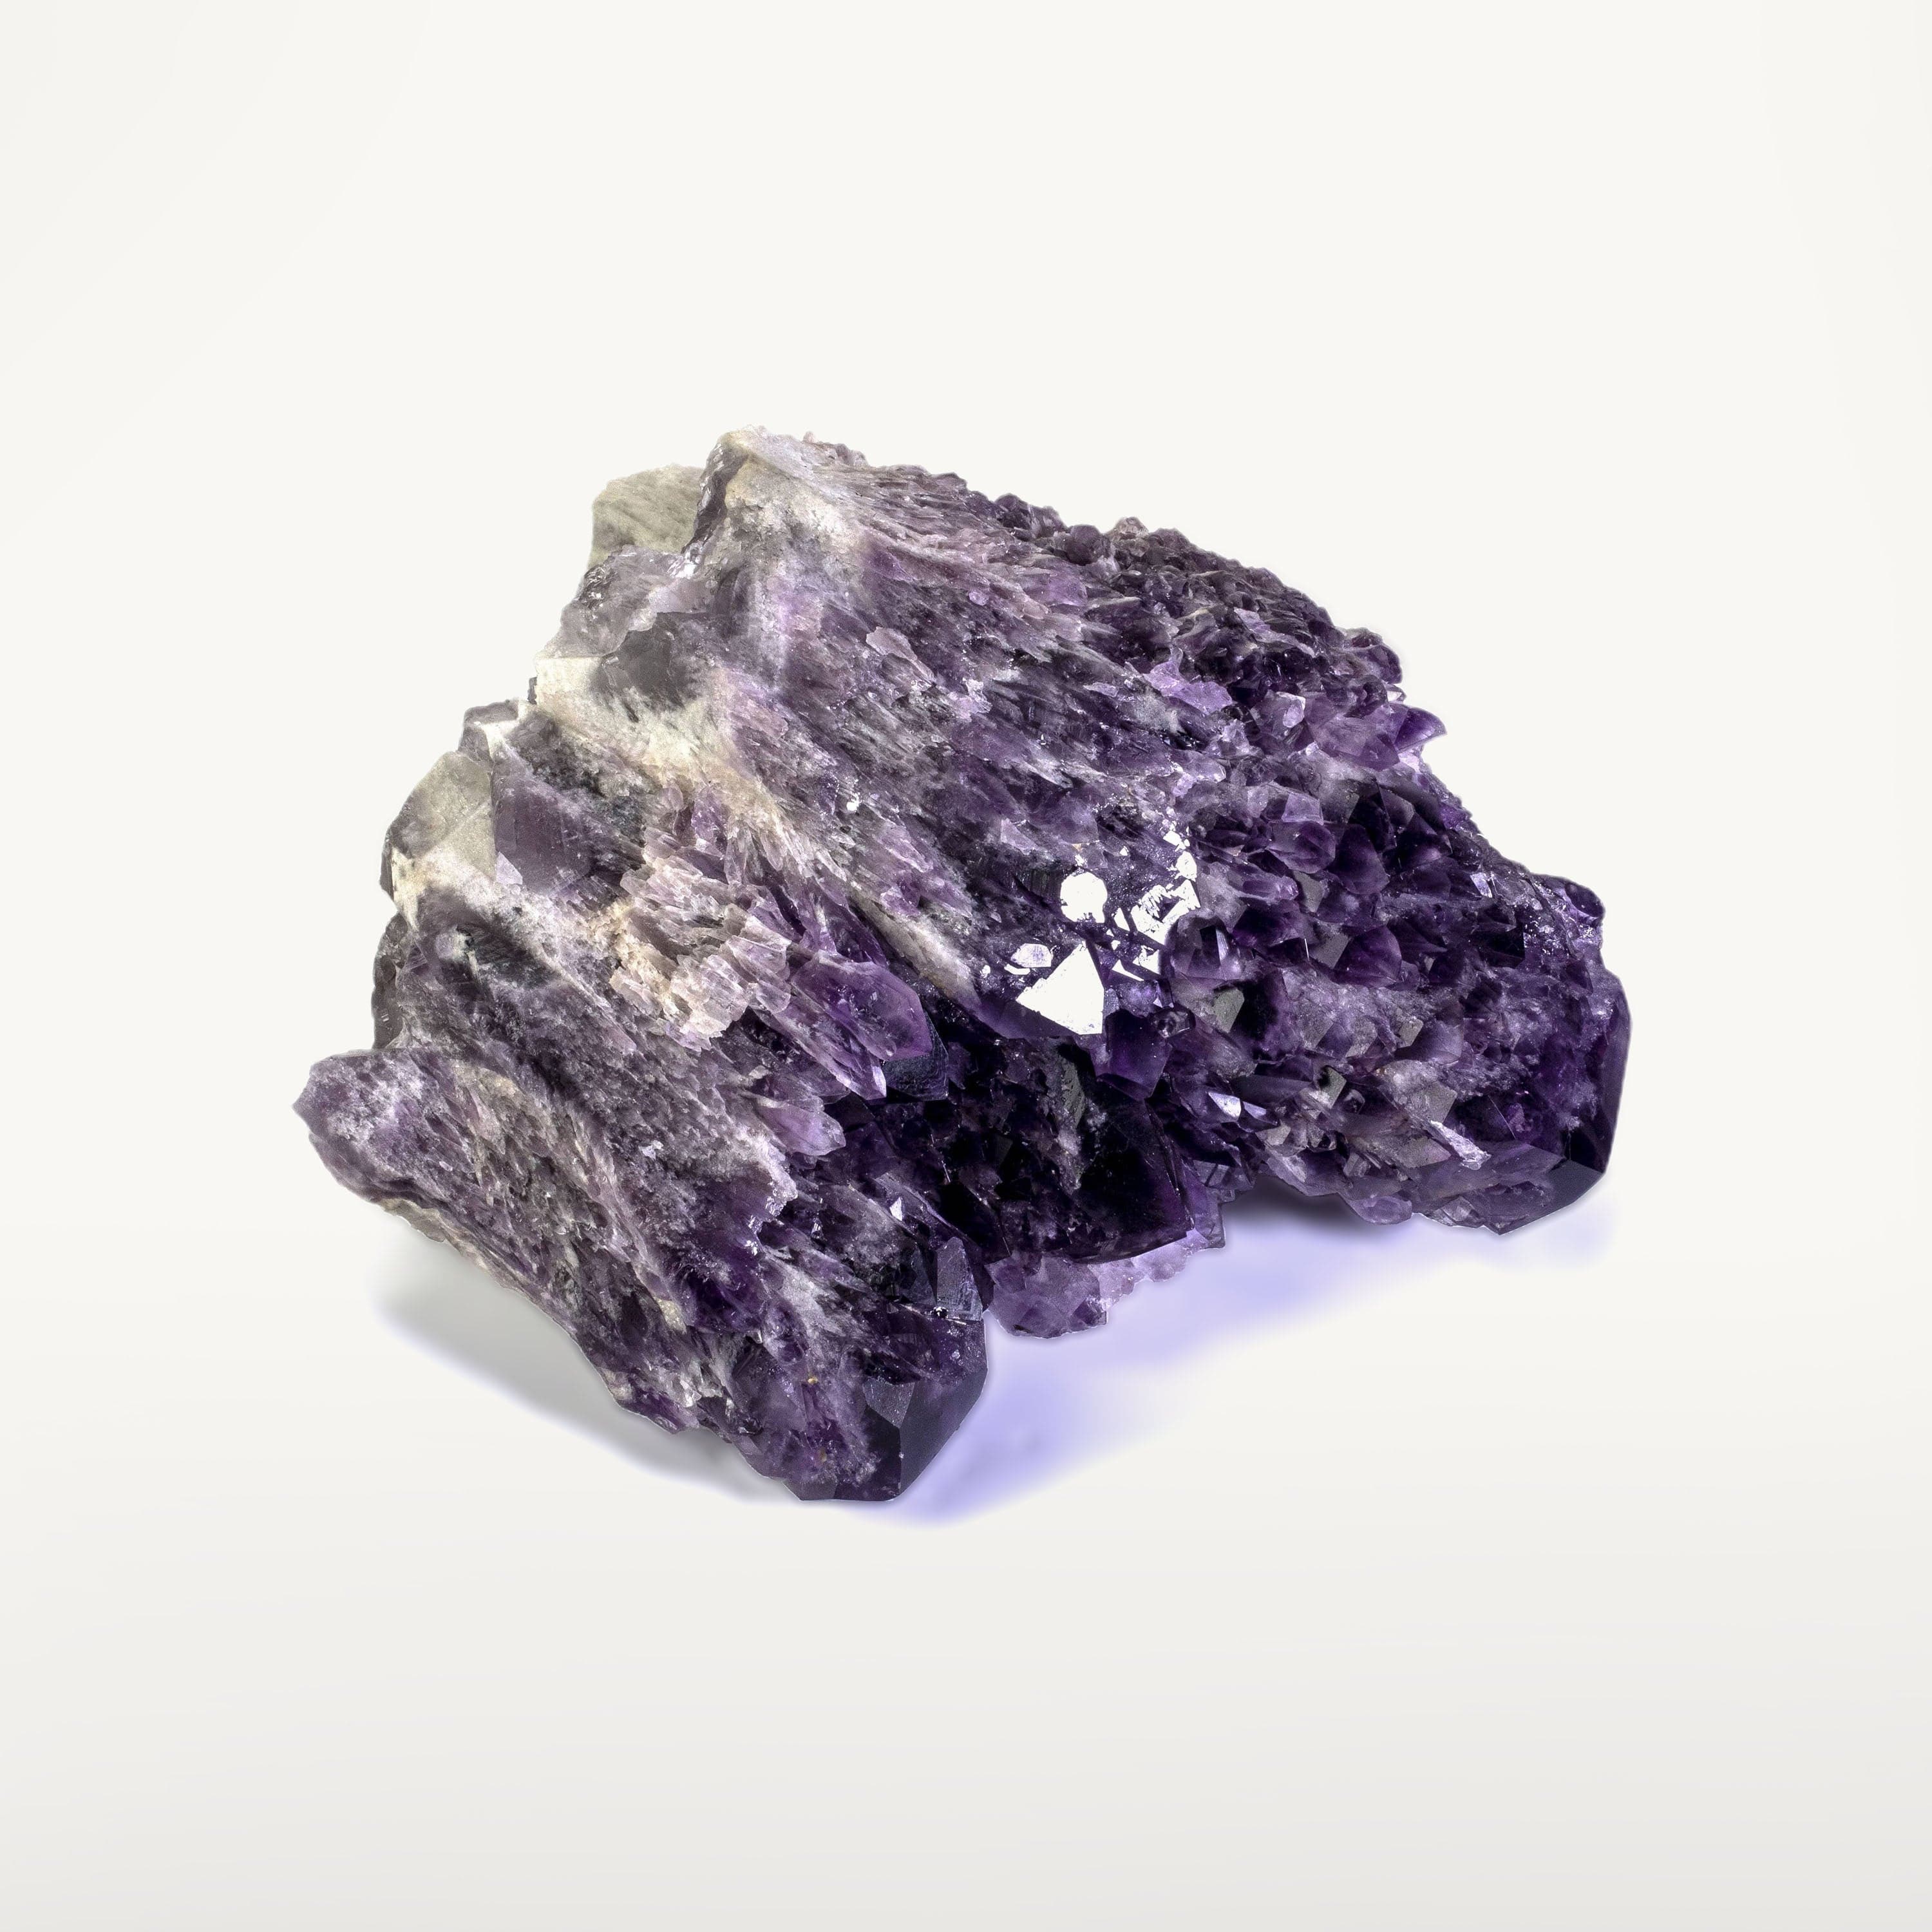 Kalifano Amethyst Rare Natural Elestial Amethyst Cluster Point from Brazil - 14.7 lbs ALW2500.001